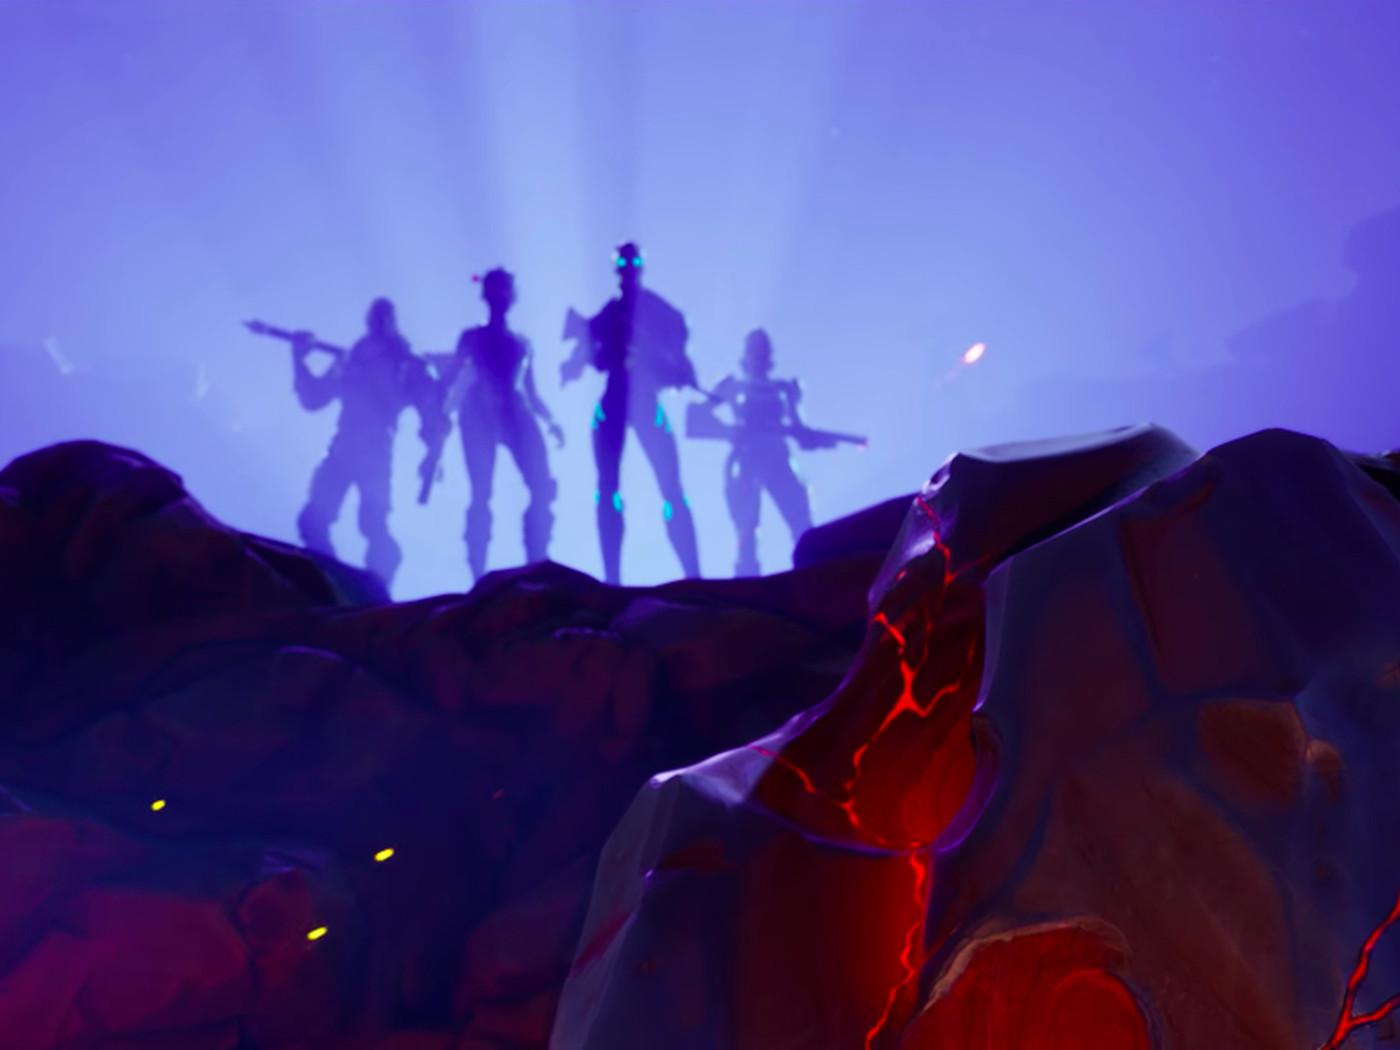 Fortnite season 4 is now live, brings huge map changes to Battle